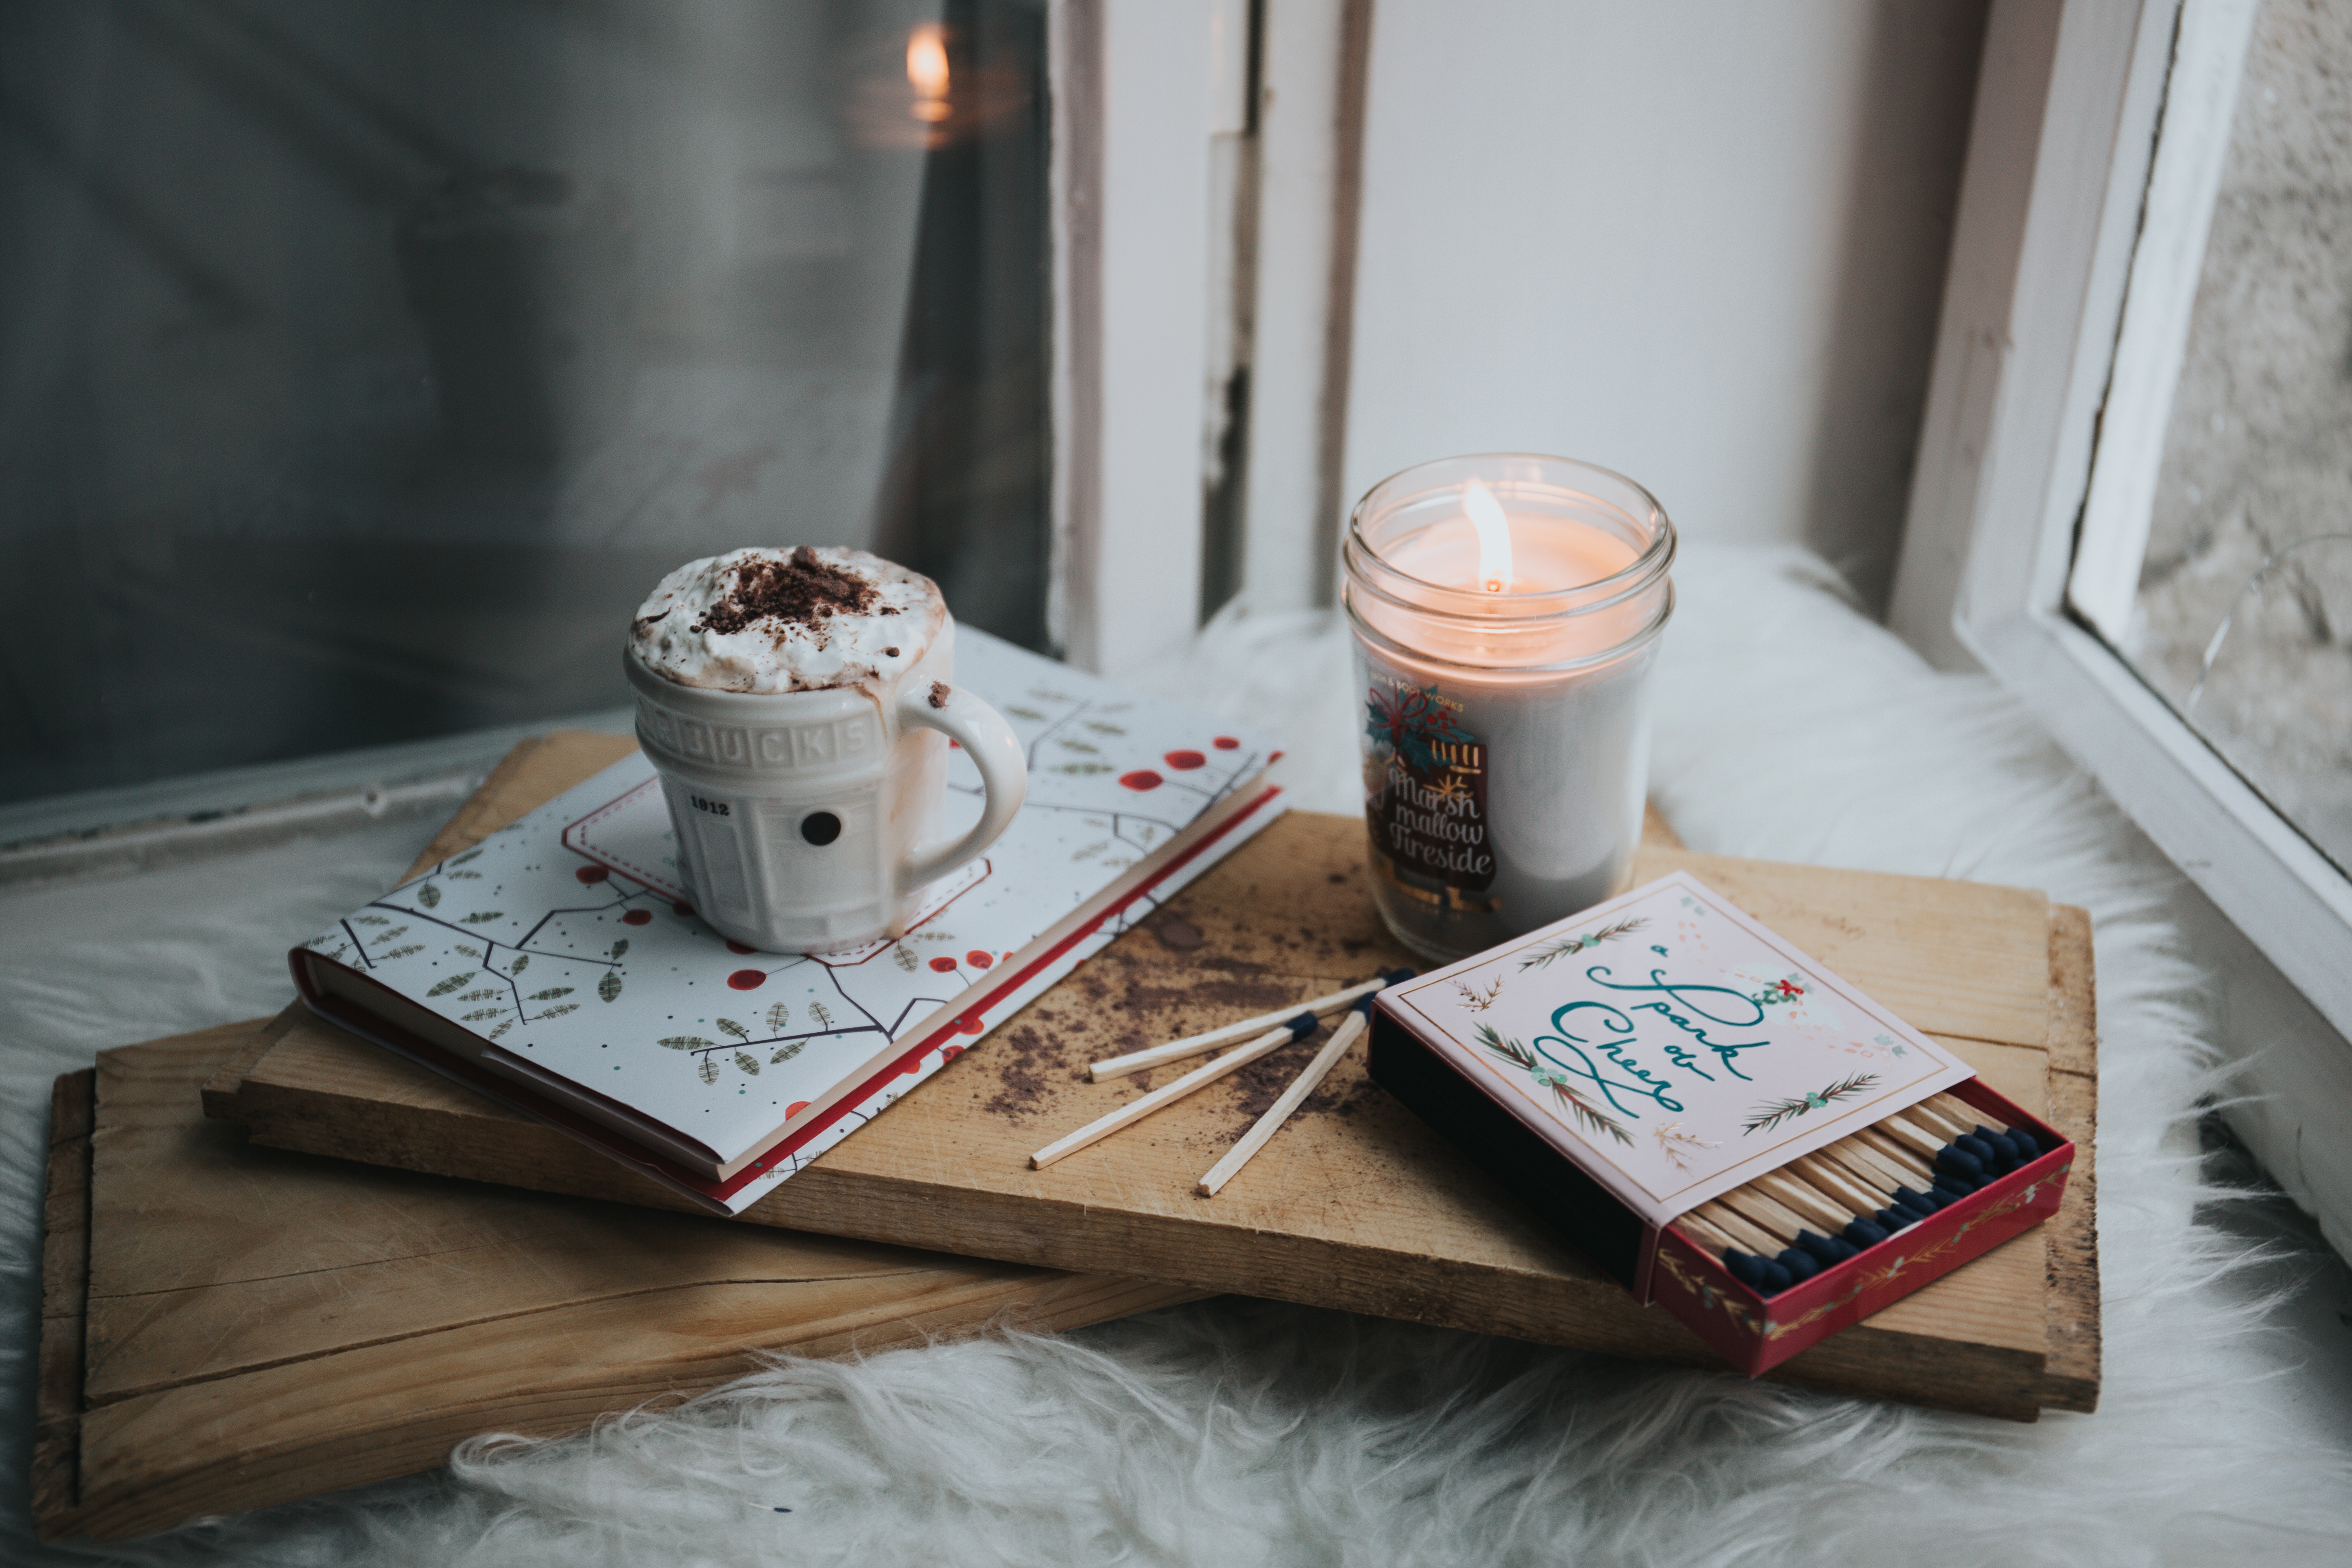 5760x3840 candle, Free image, winter, decor, match, coffee, holiday, christma, warm, book, cozy